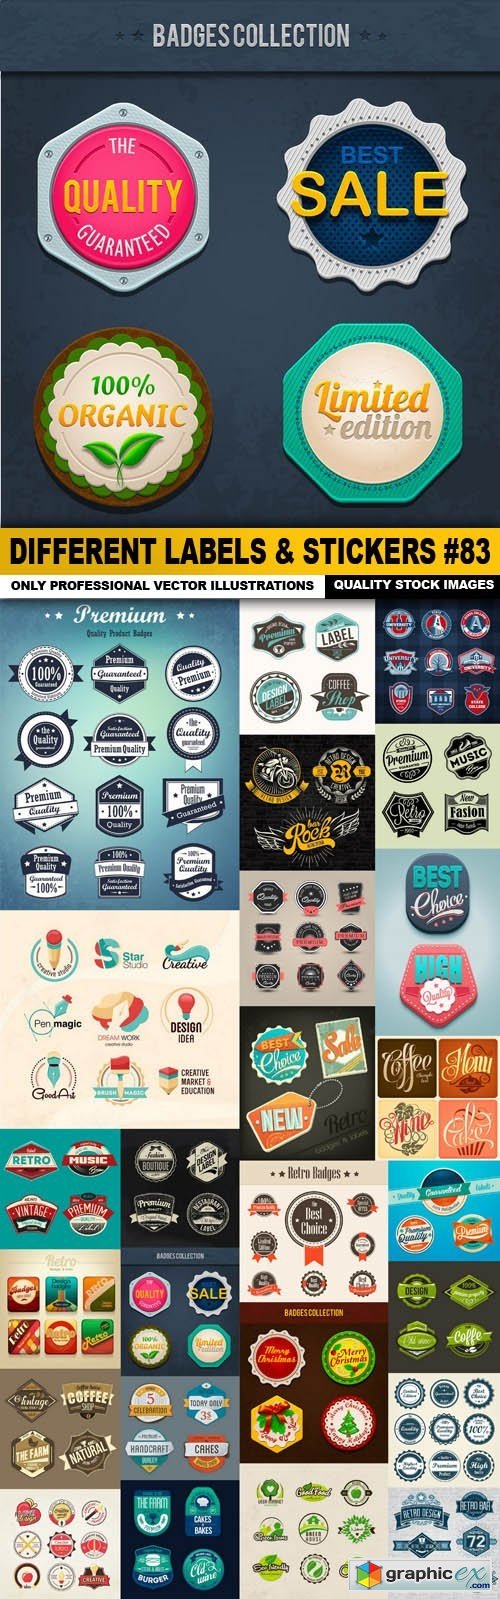 Different Labels & Stickers #83